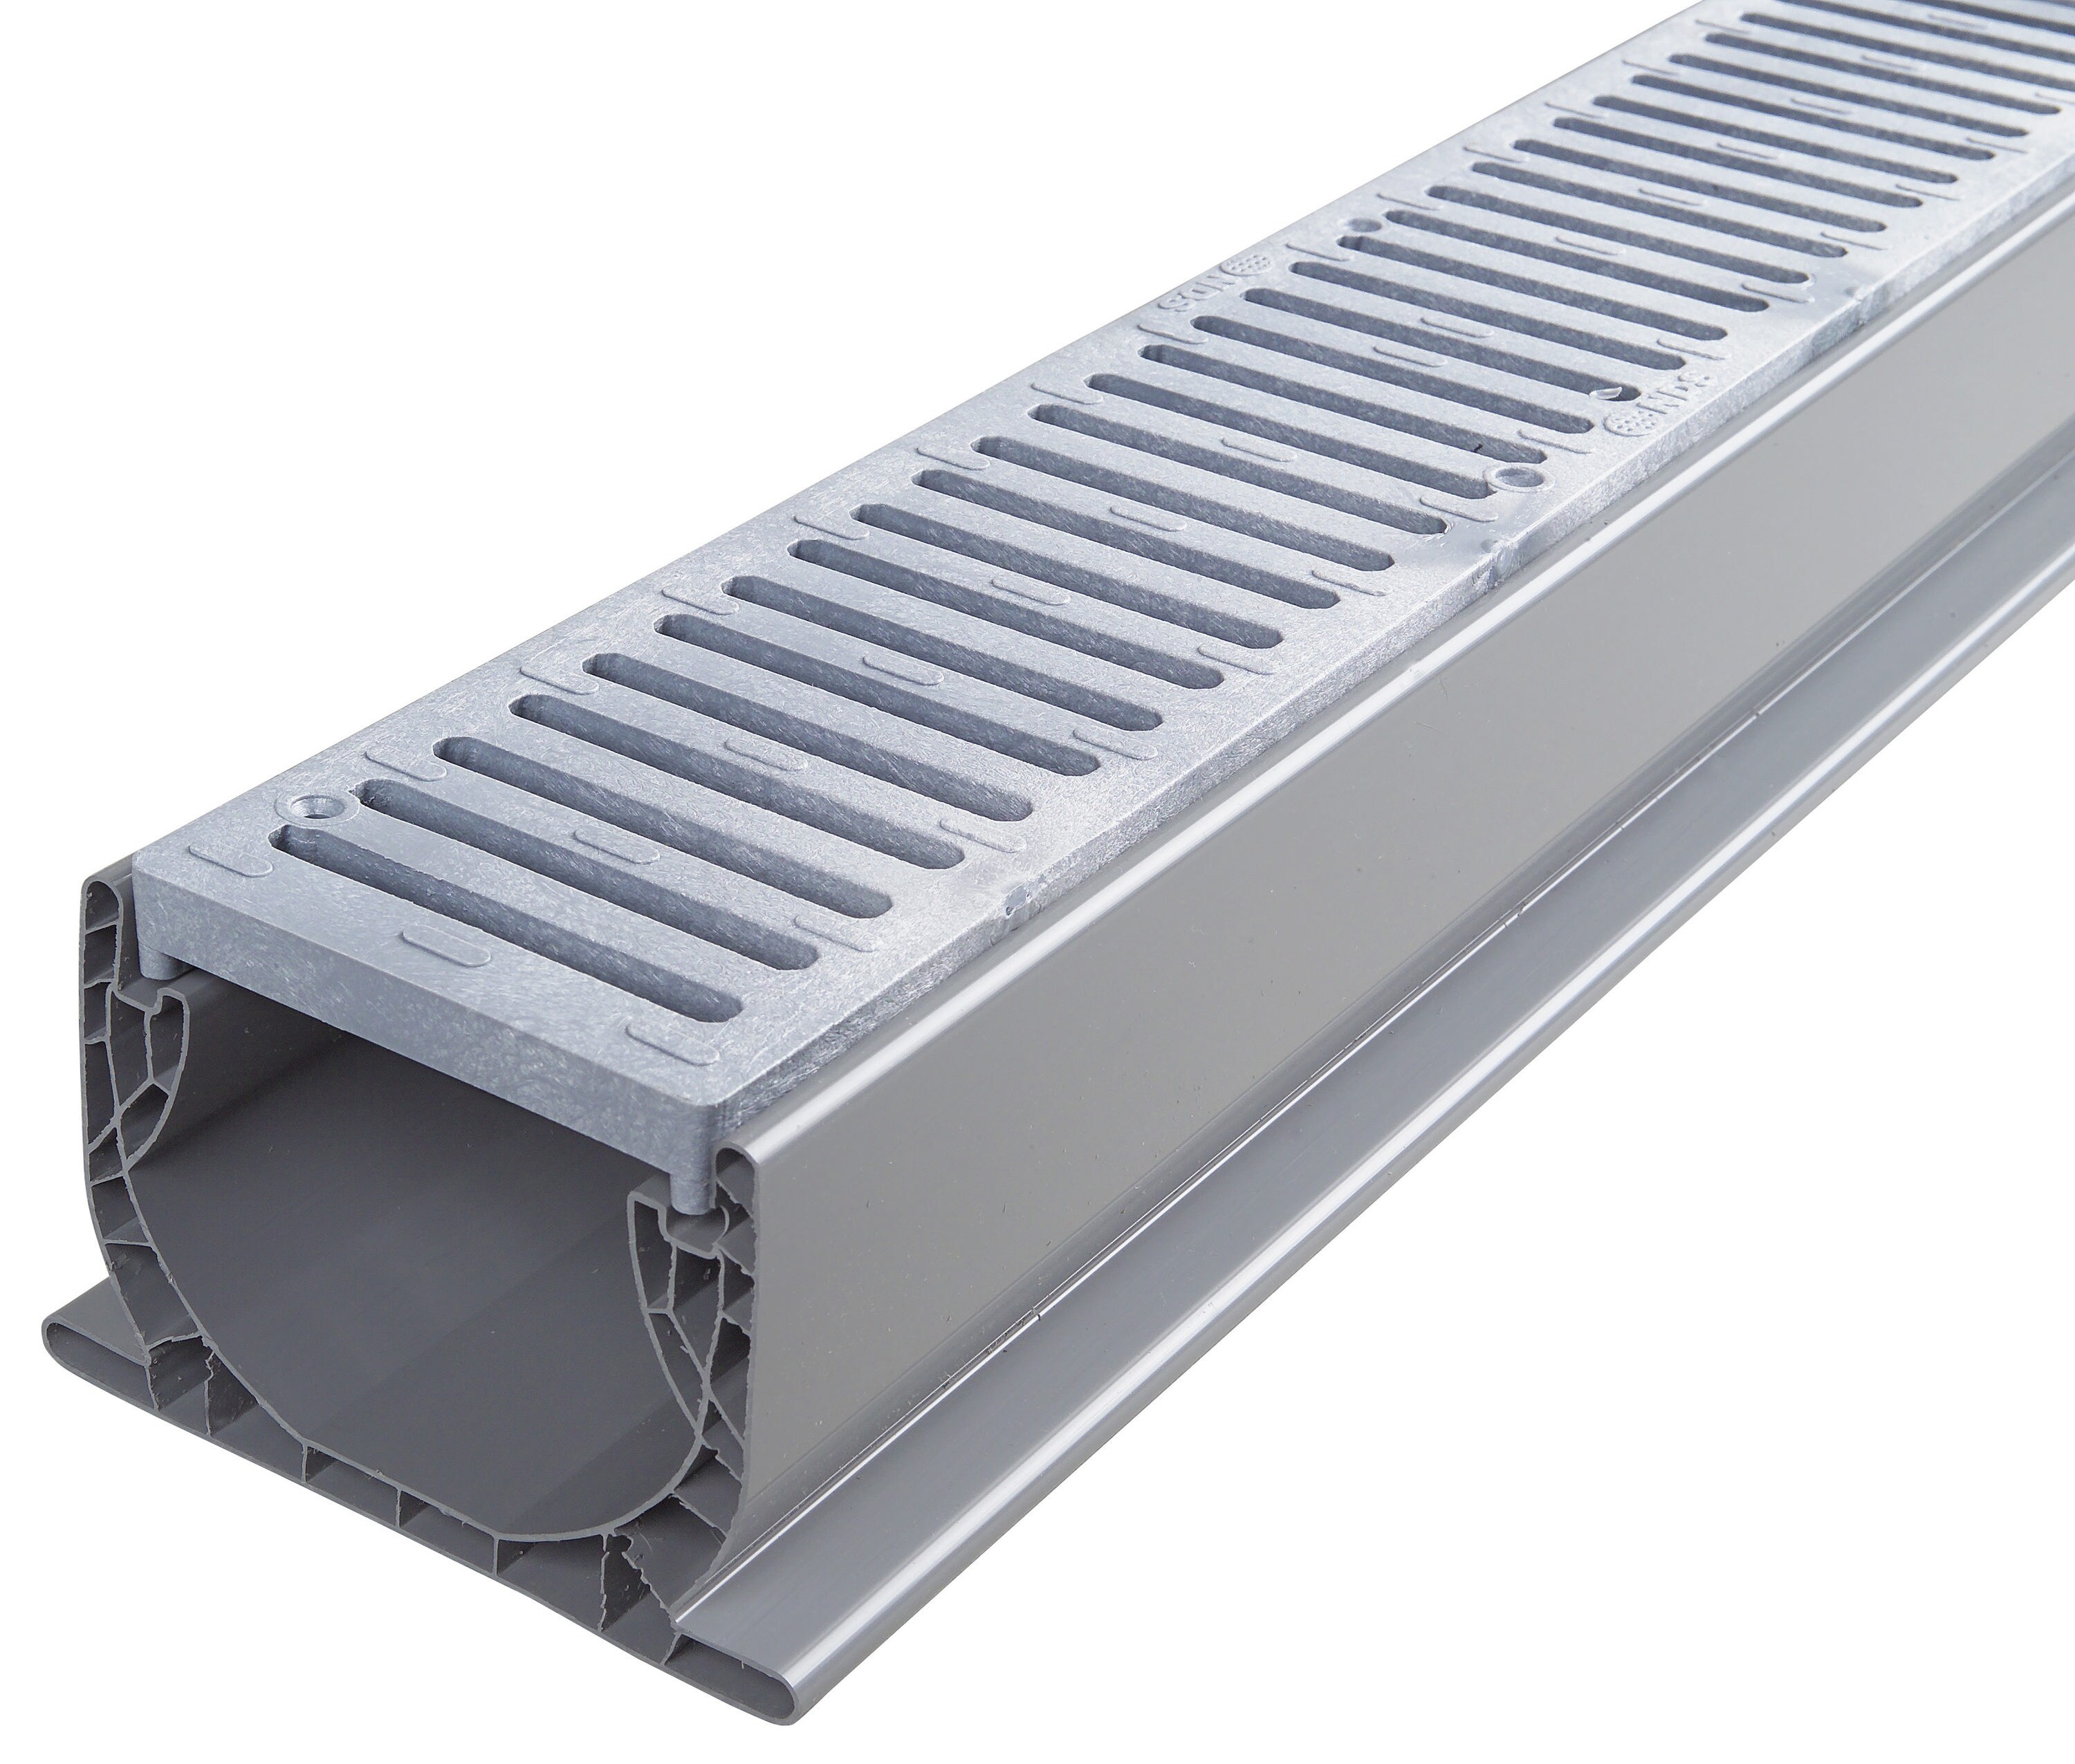 NDS 2 ft. Plastic Spee-D Channel Drain Grate in Gray 241-1 - The Home Depot